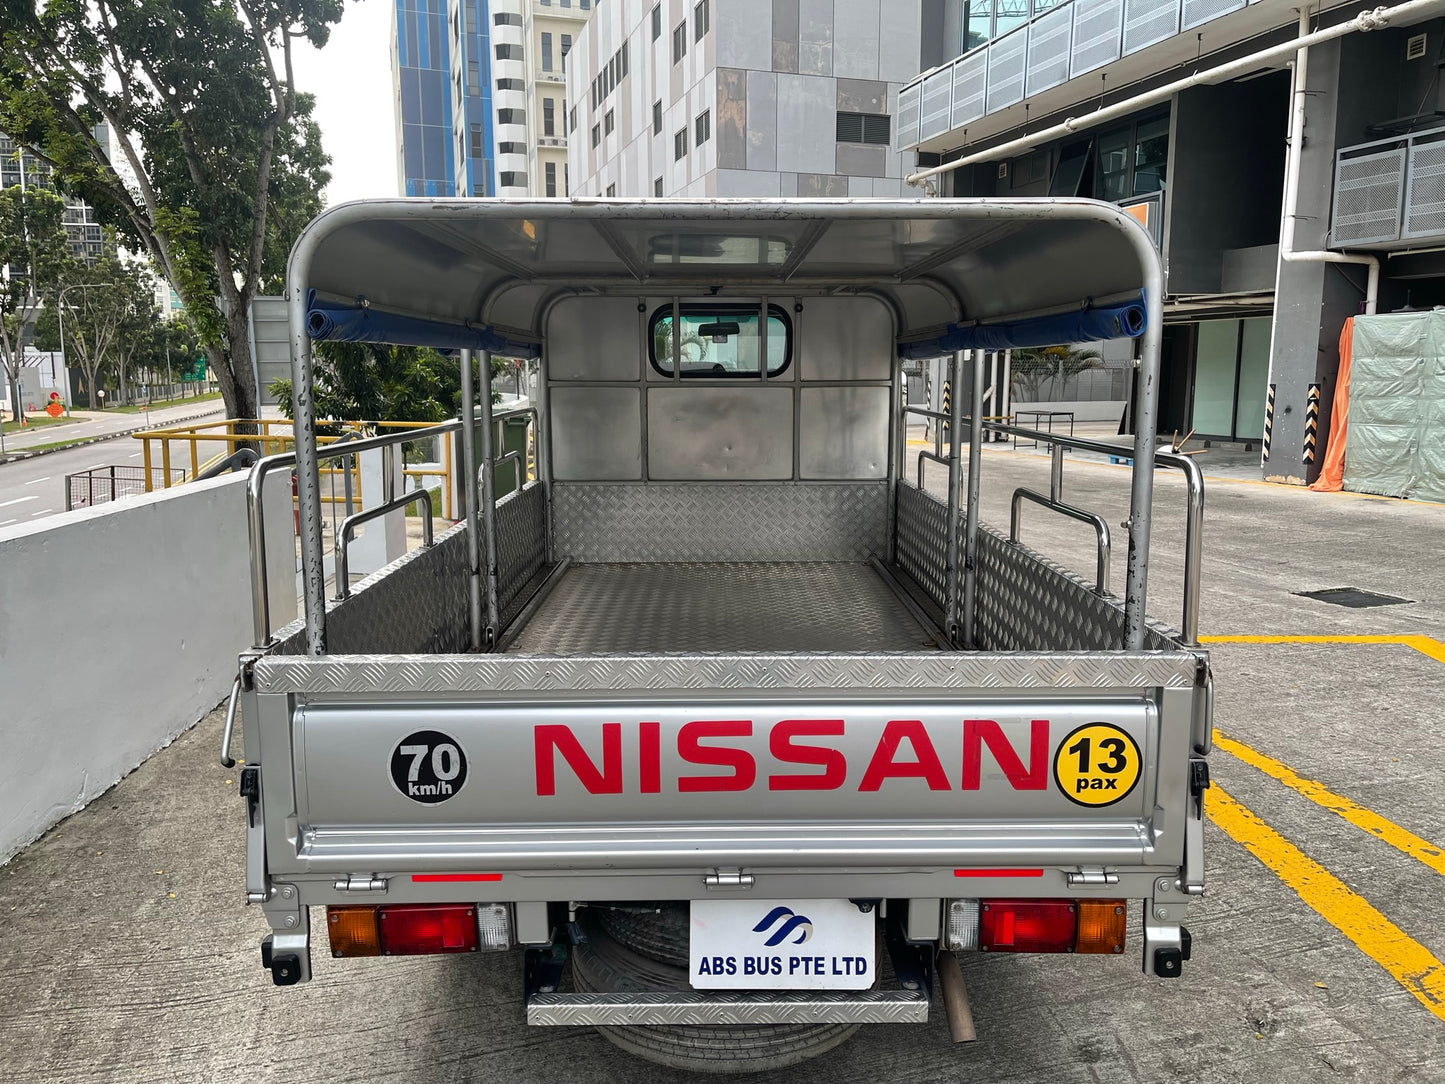 Nissan Cabstar 2.0M with Retriable Canopy & Checked Plated (COE end 2031)